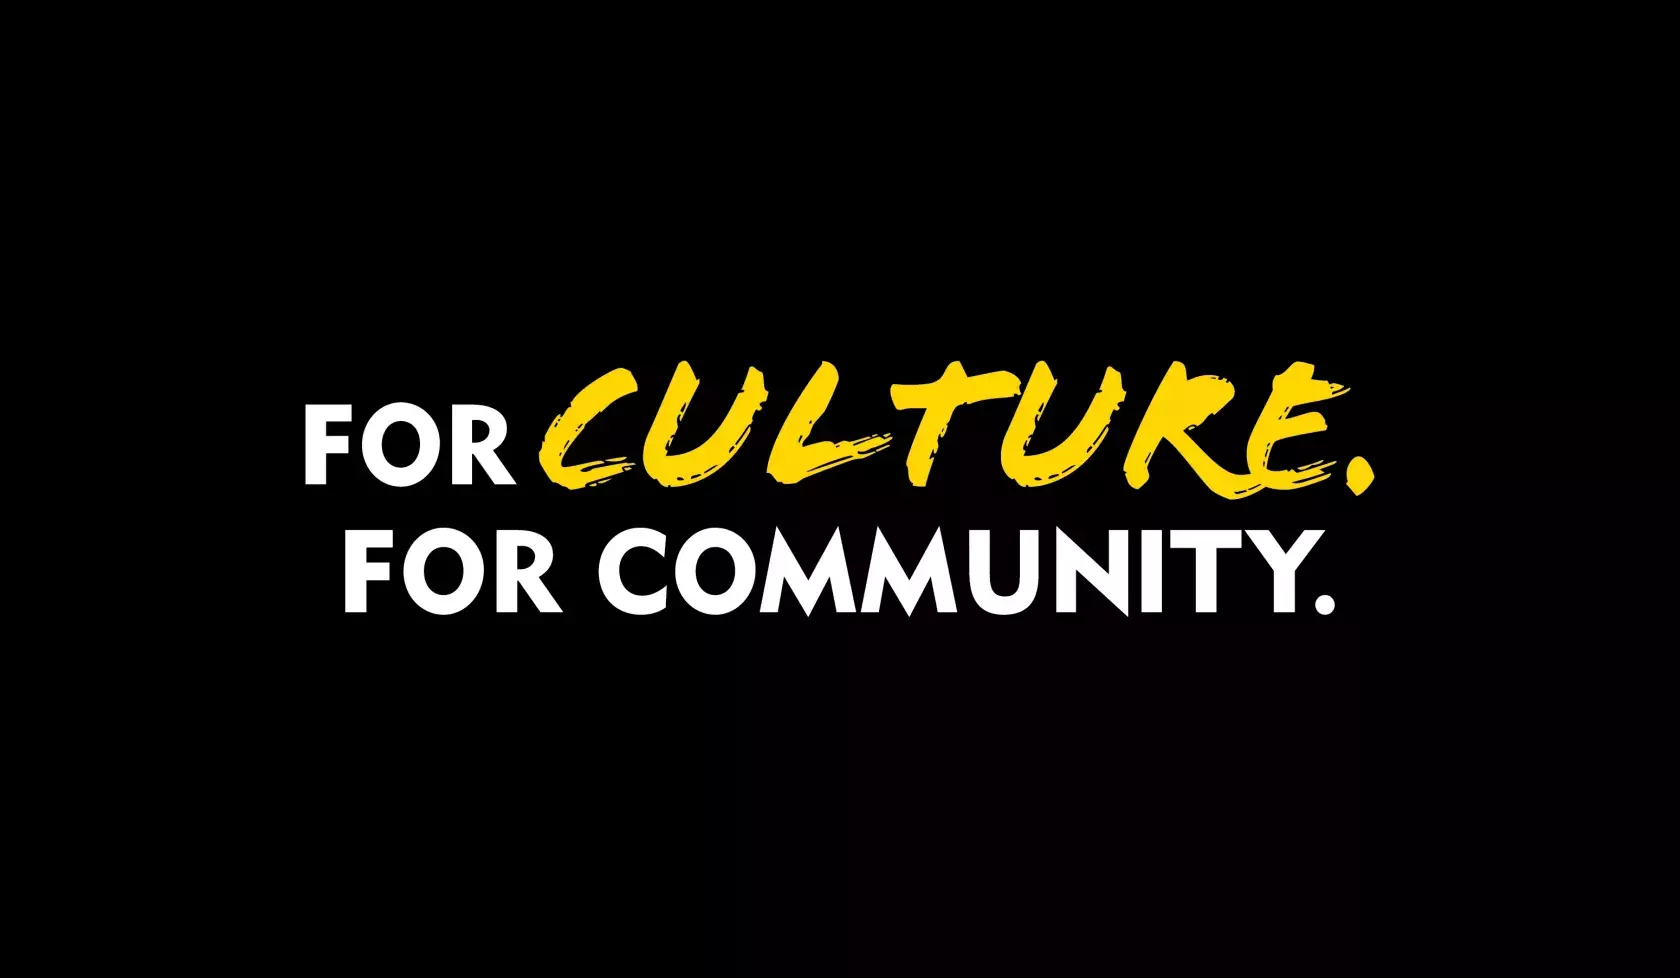 FORCULTURE FOR COMMUNITY